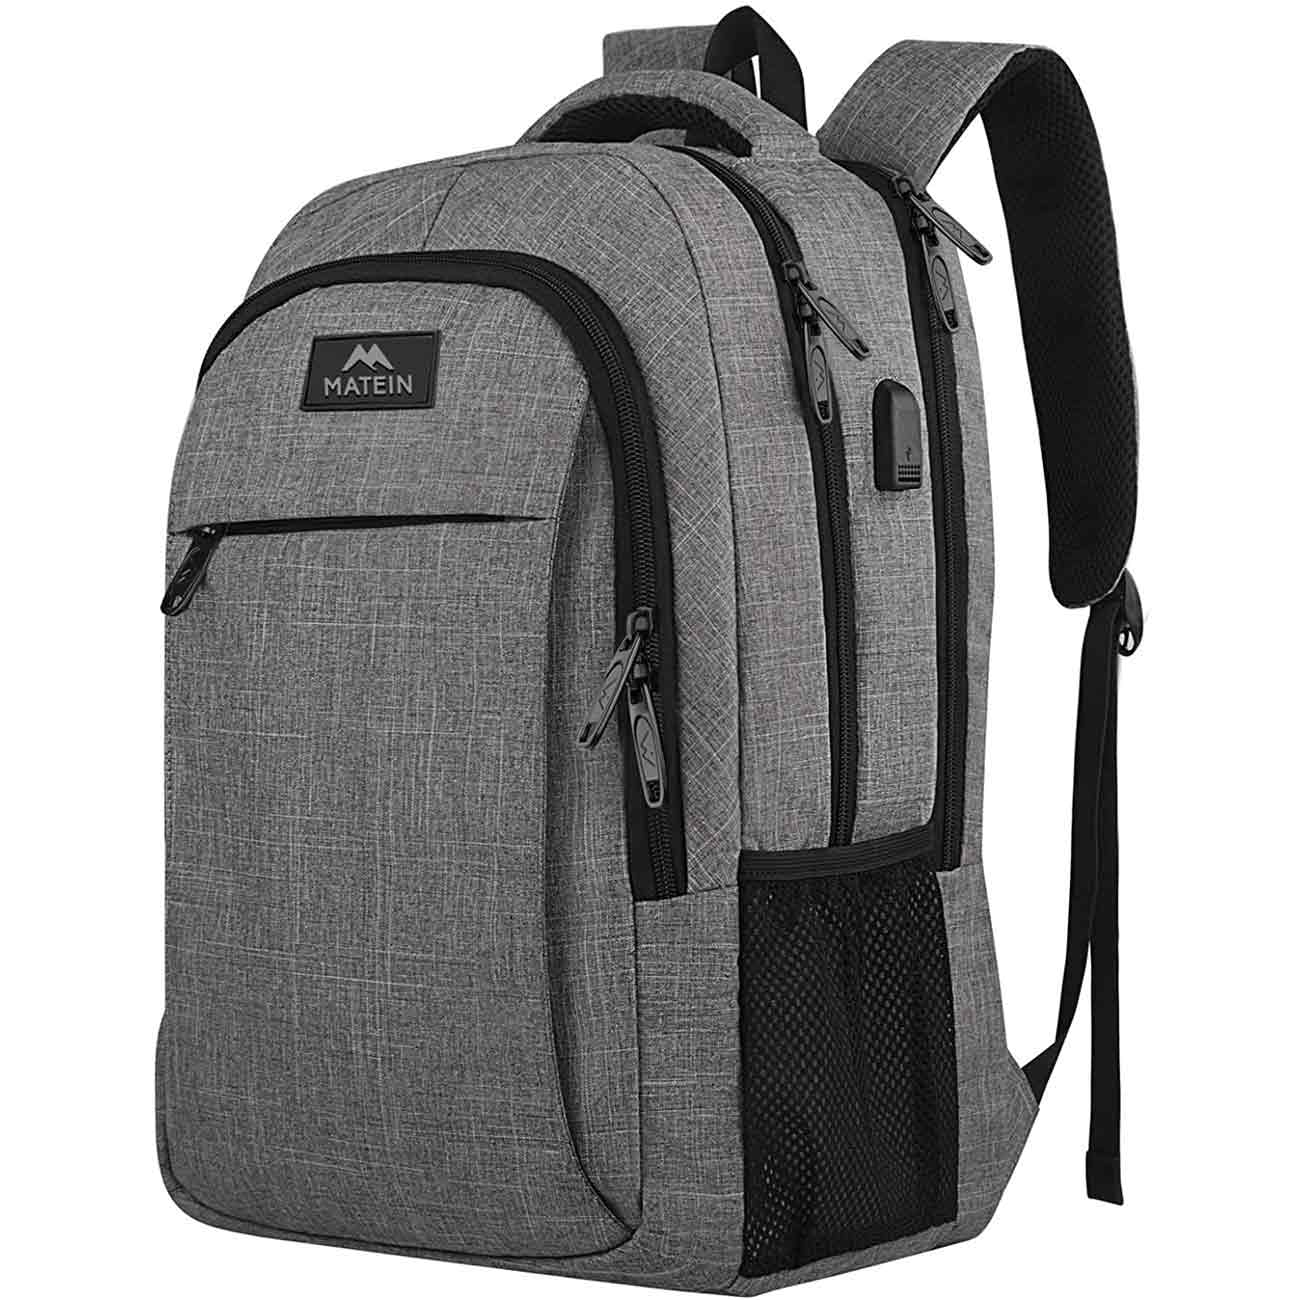 Matein Mlassic Travel Laptop Backpack - travel laptop backpack